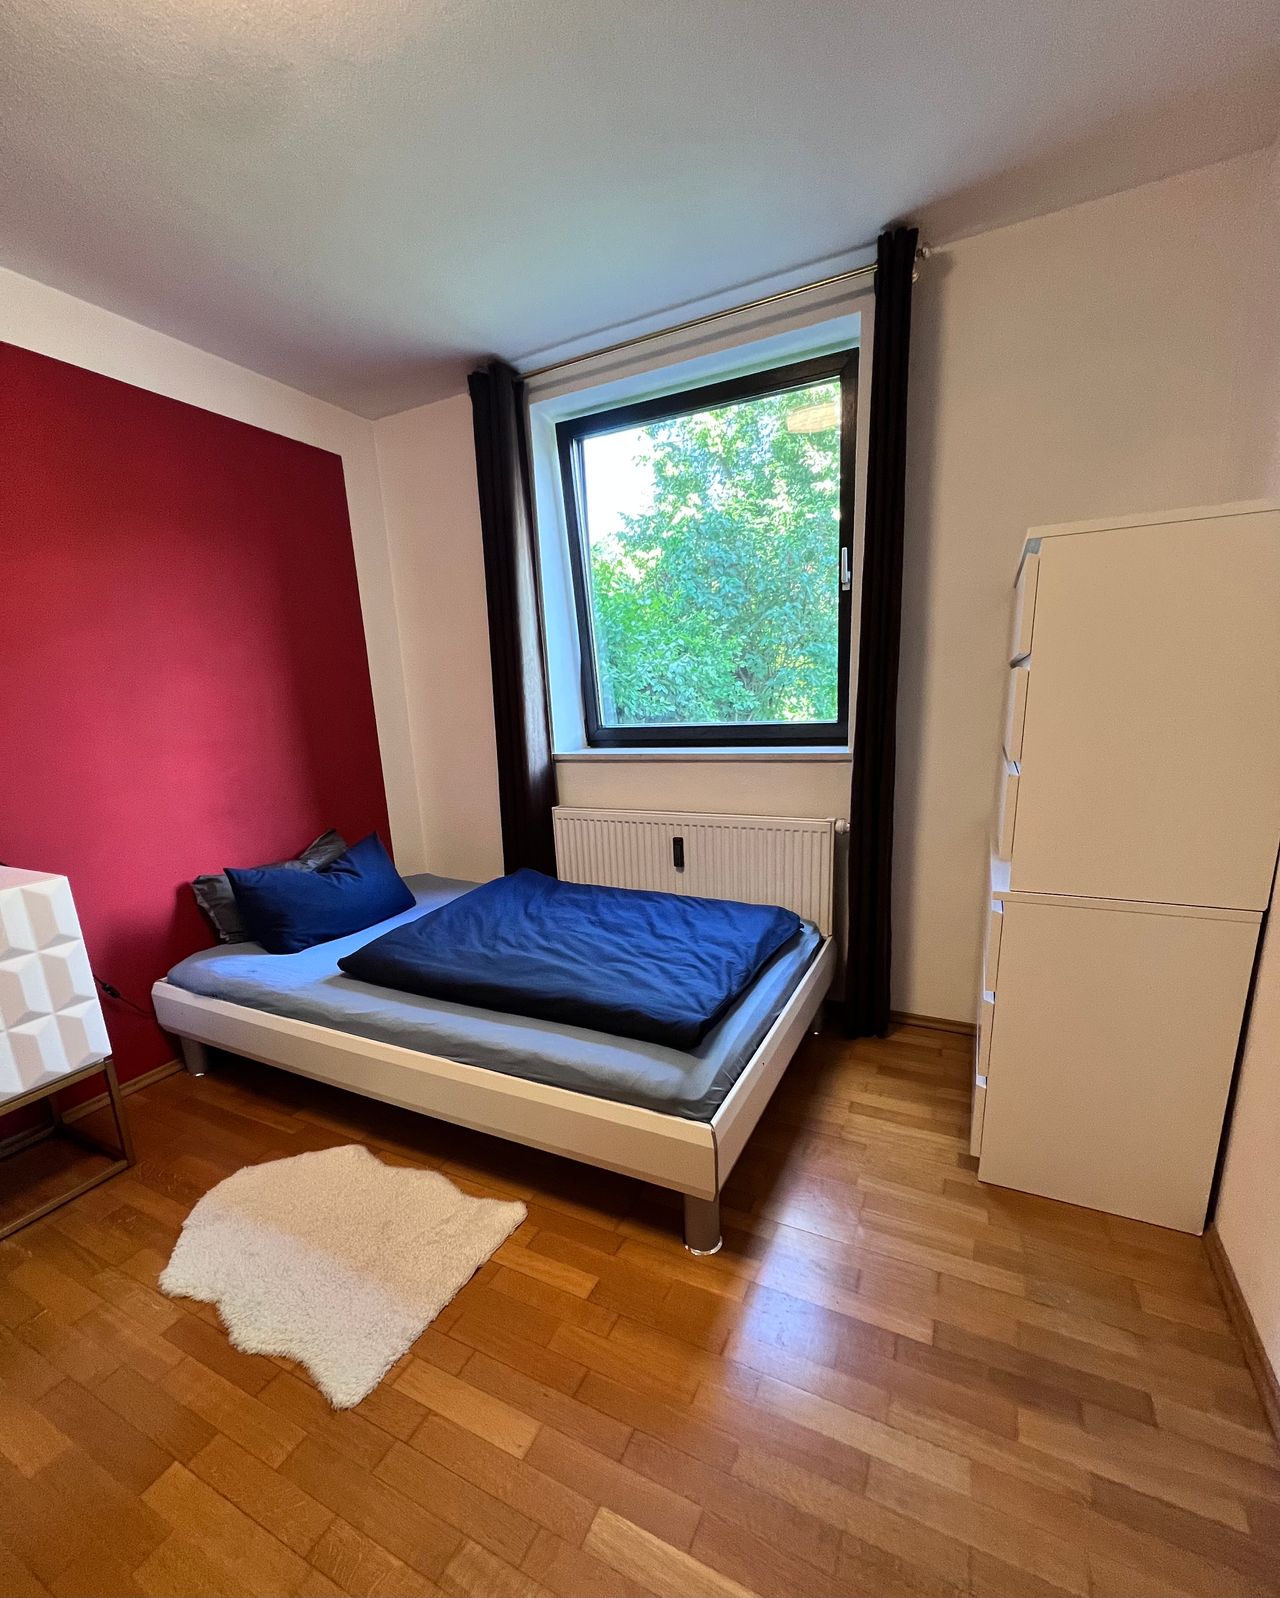 Furnished three rooms ground floor apartment with own garden directly at the Engl. garden and small river - with whirlpool and fireplace